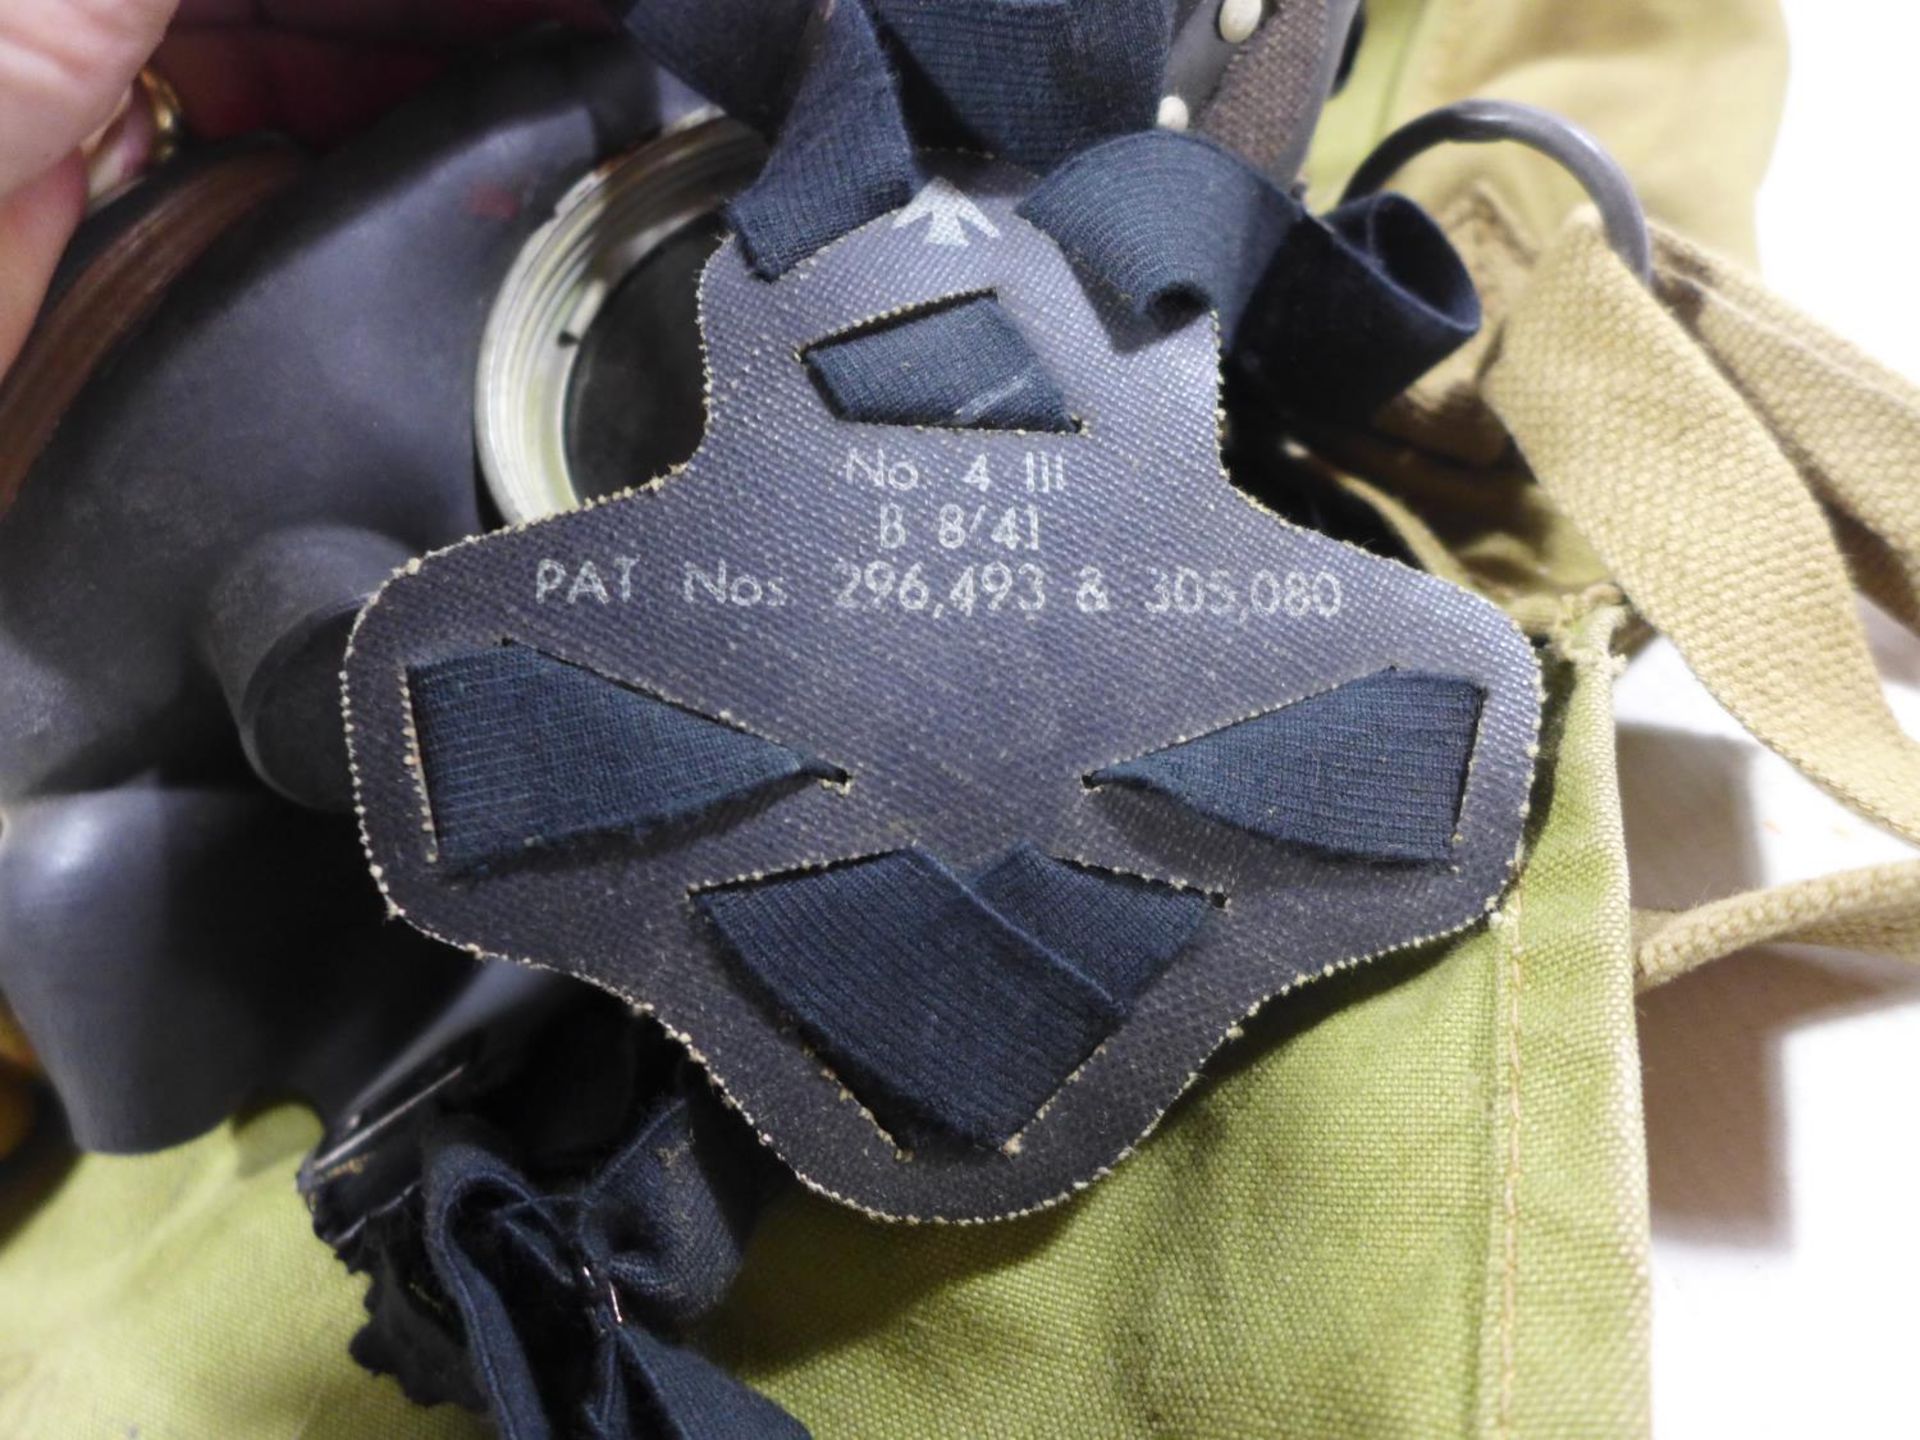 A WORLD WAR II MILITARY ISSUE GAS MASK AND BAG - Image 4 of 4